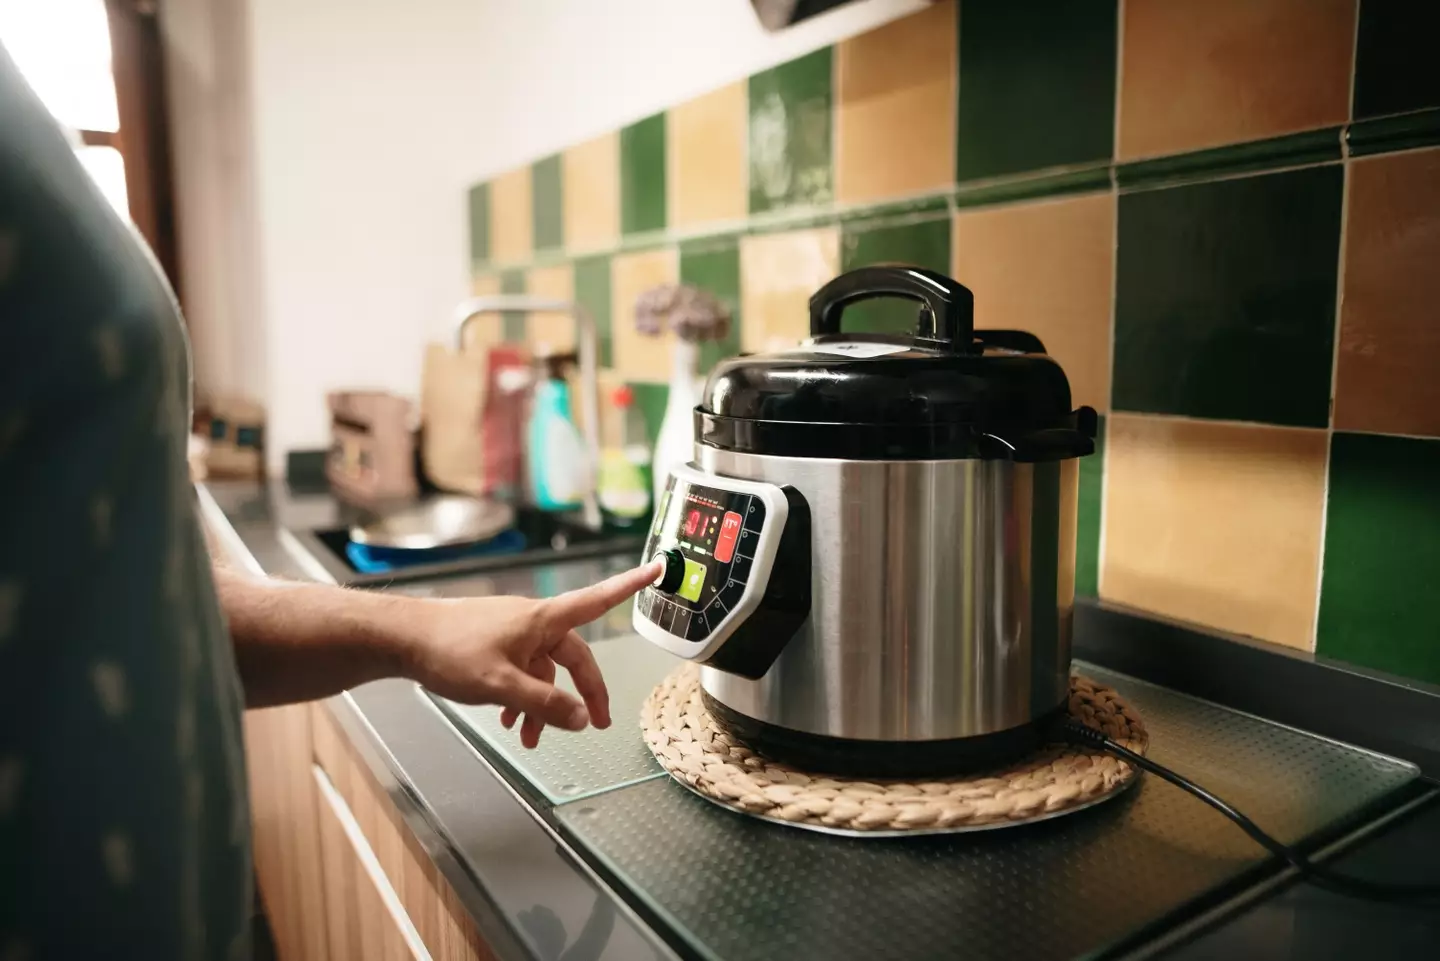 Safety comes first when using your slow cooker.